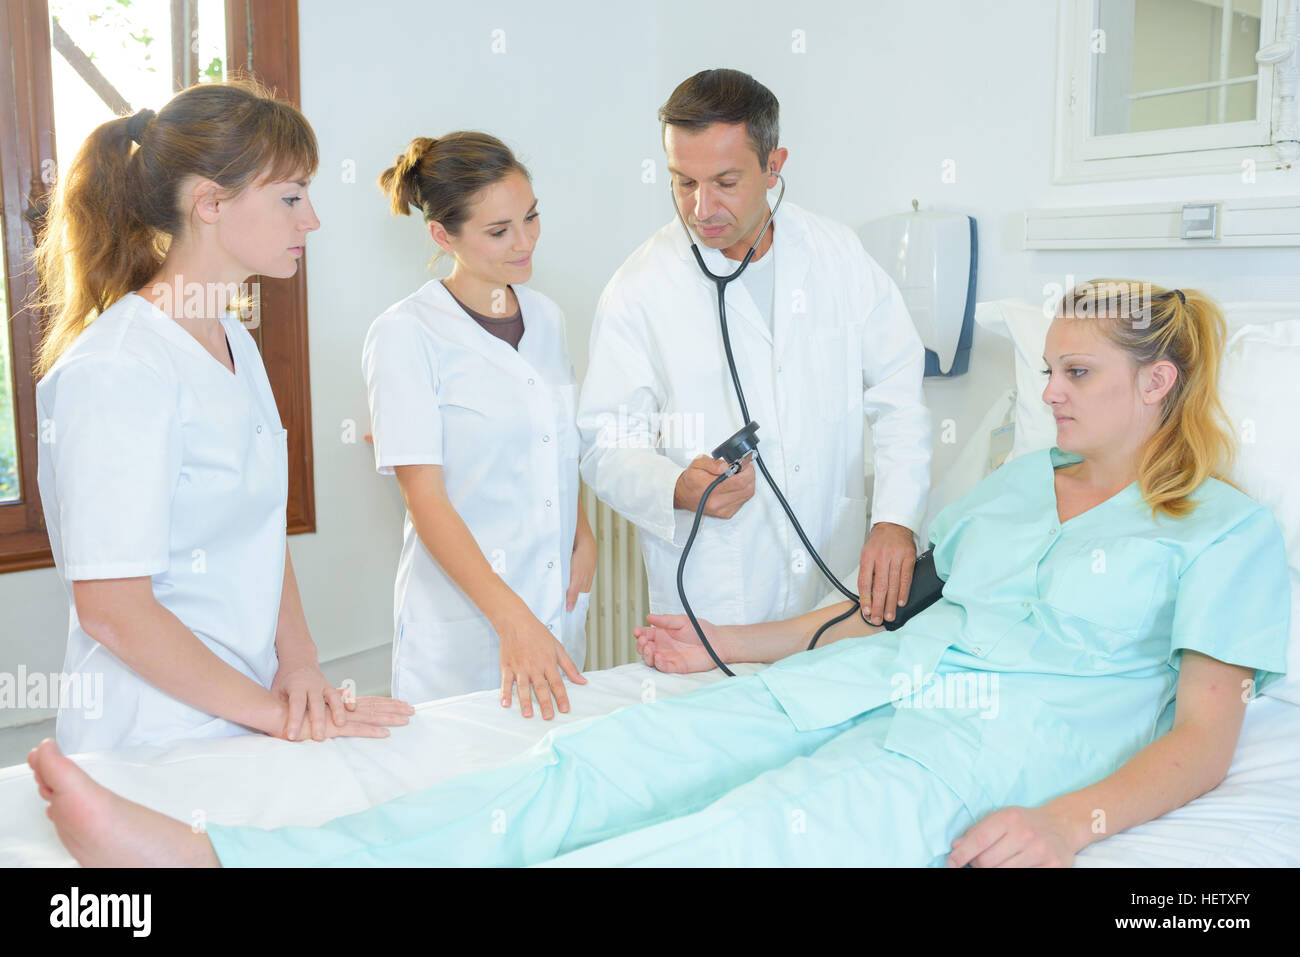 Medical students around patient's hospital bed Stock Photo